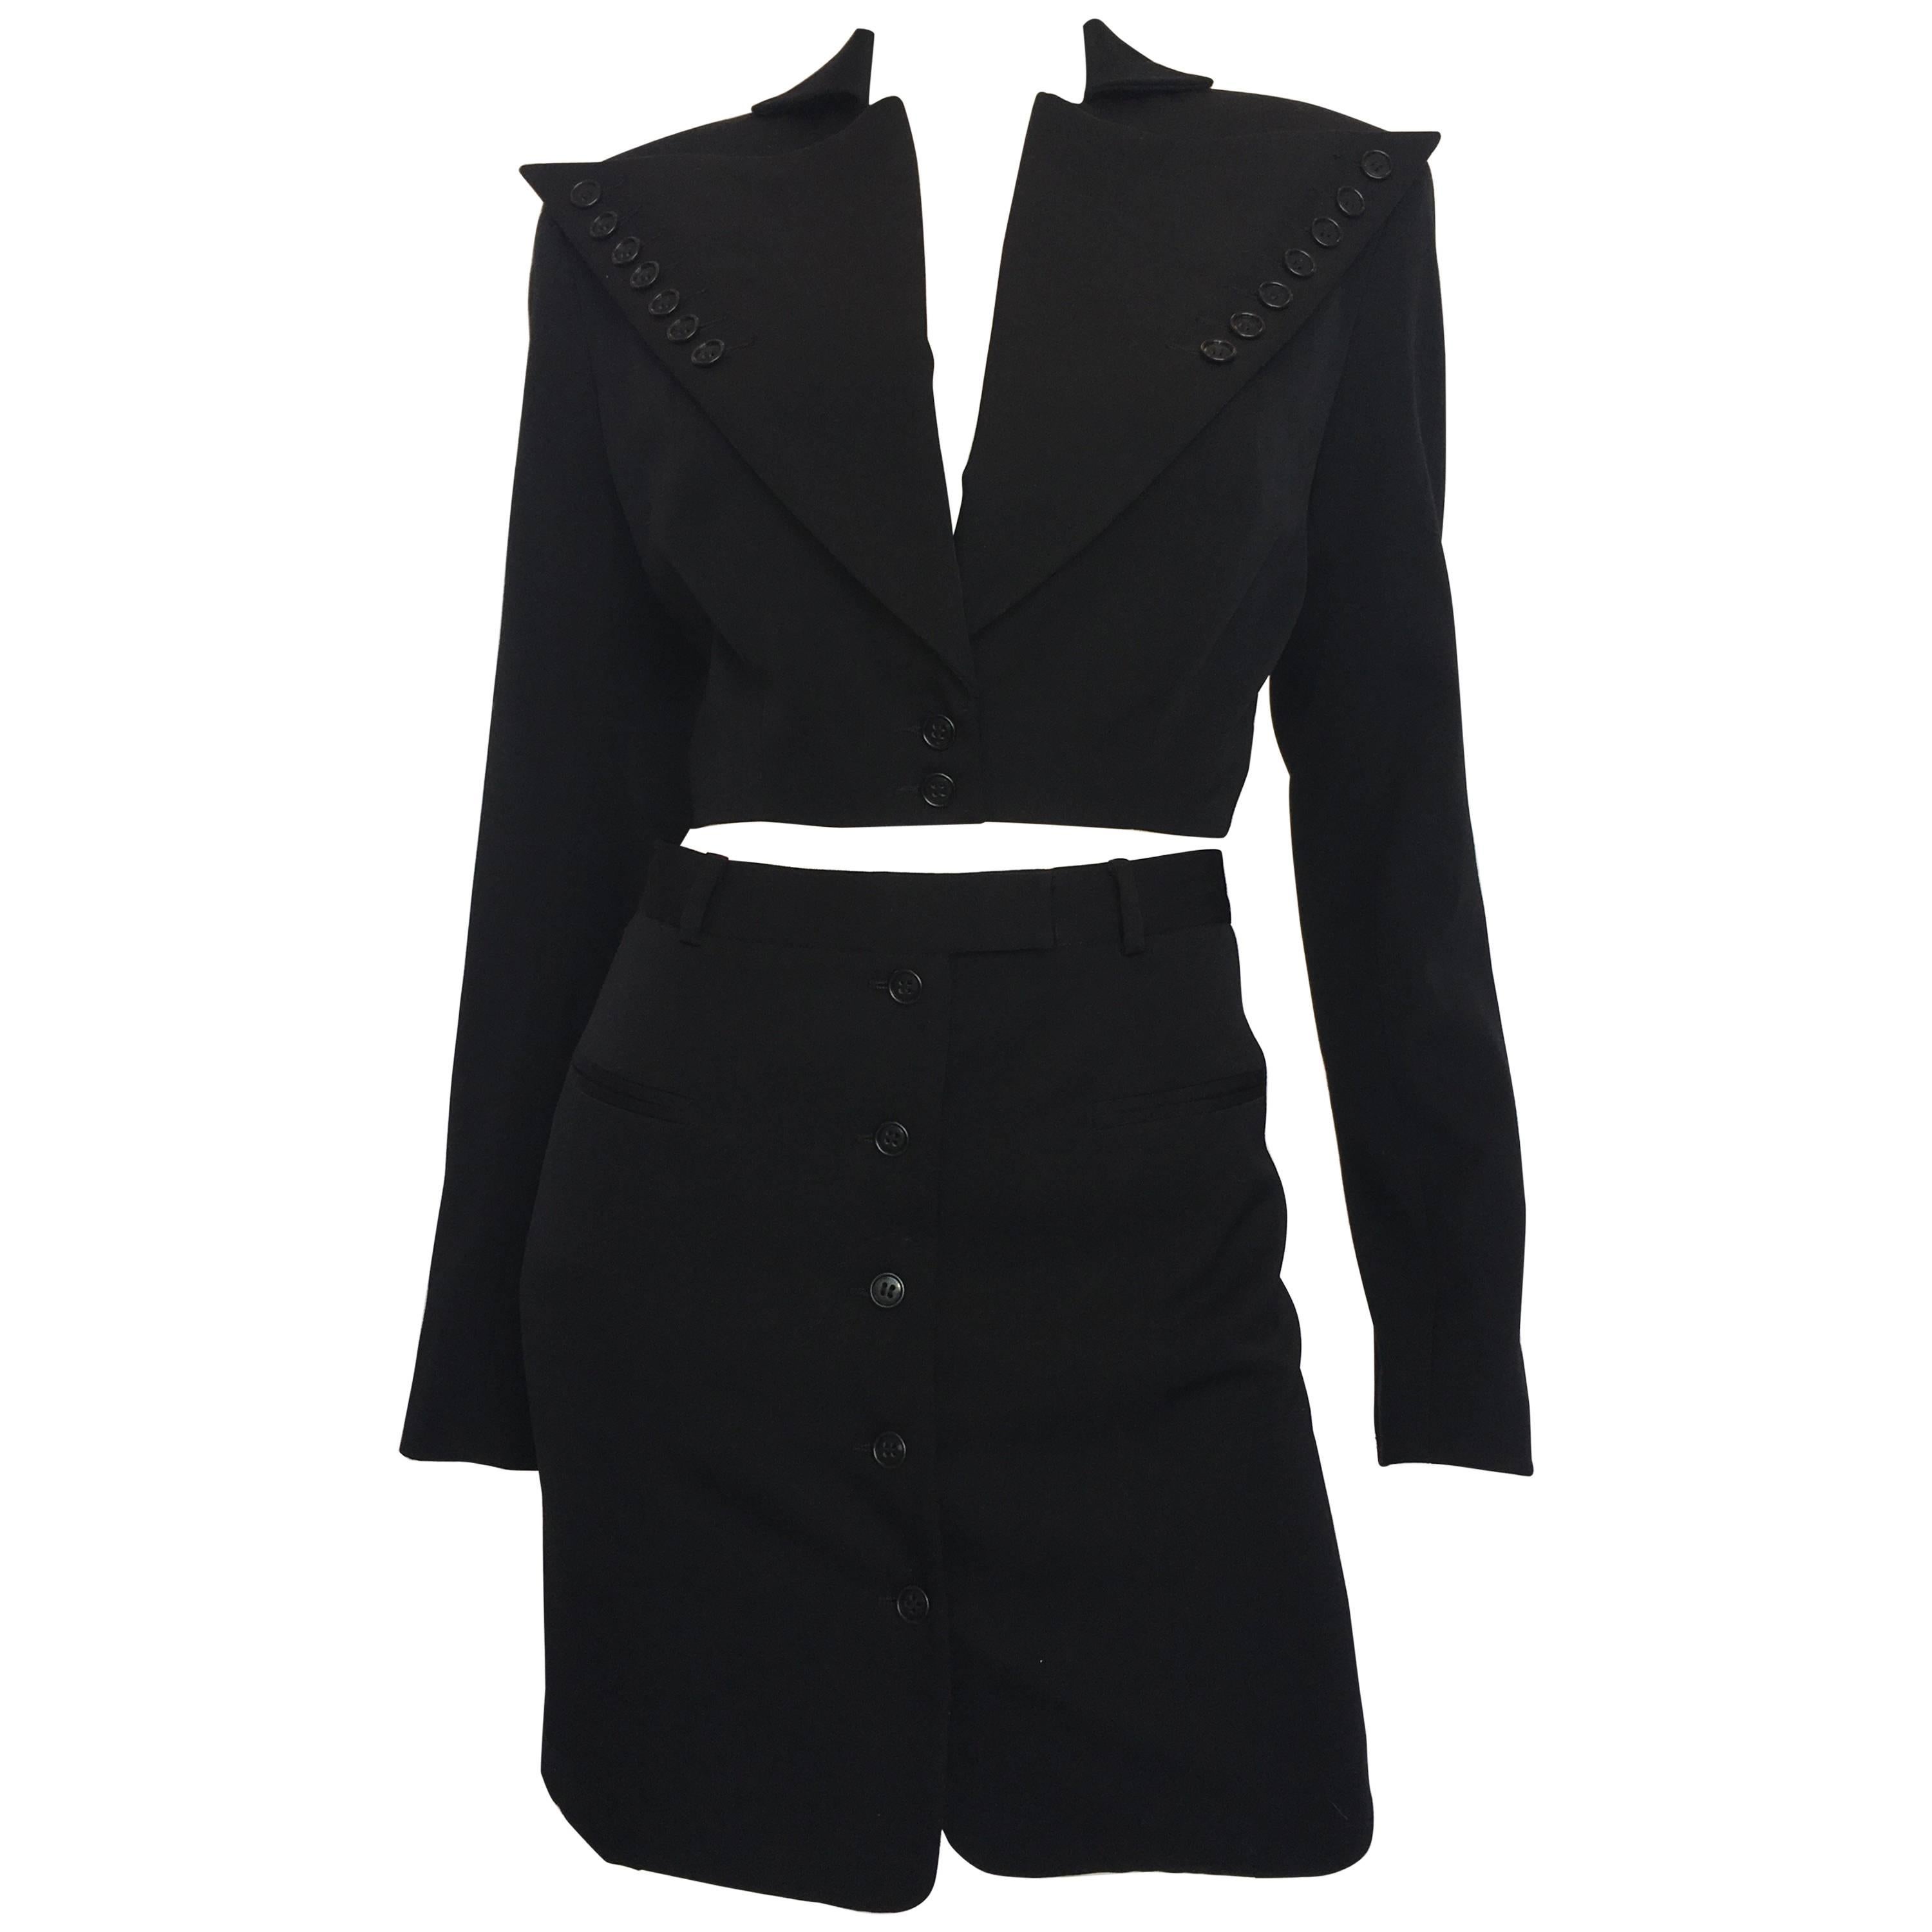 1980s OMO by Norma Kamali Black Wool Mini Skirt Suit with Button Detail